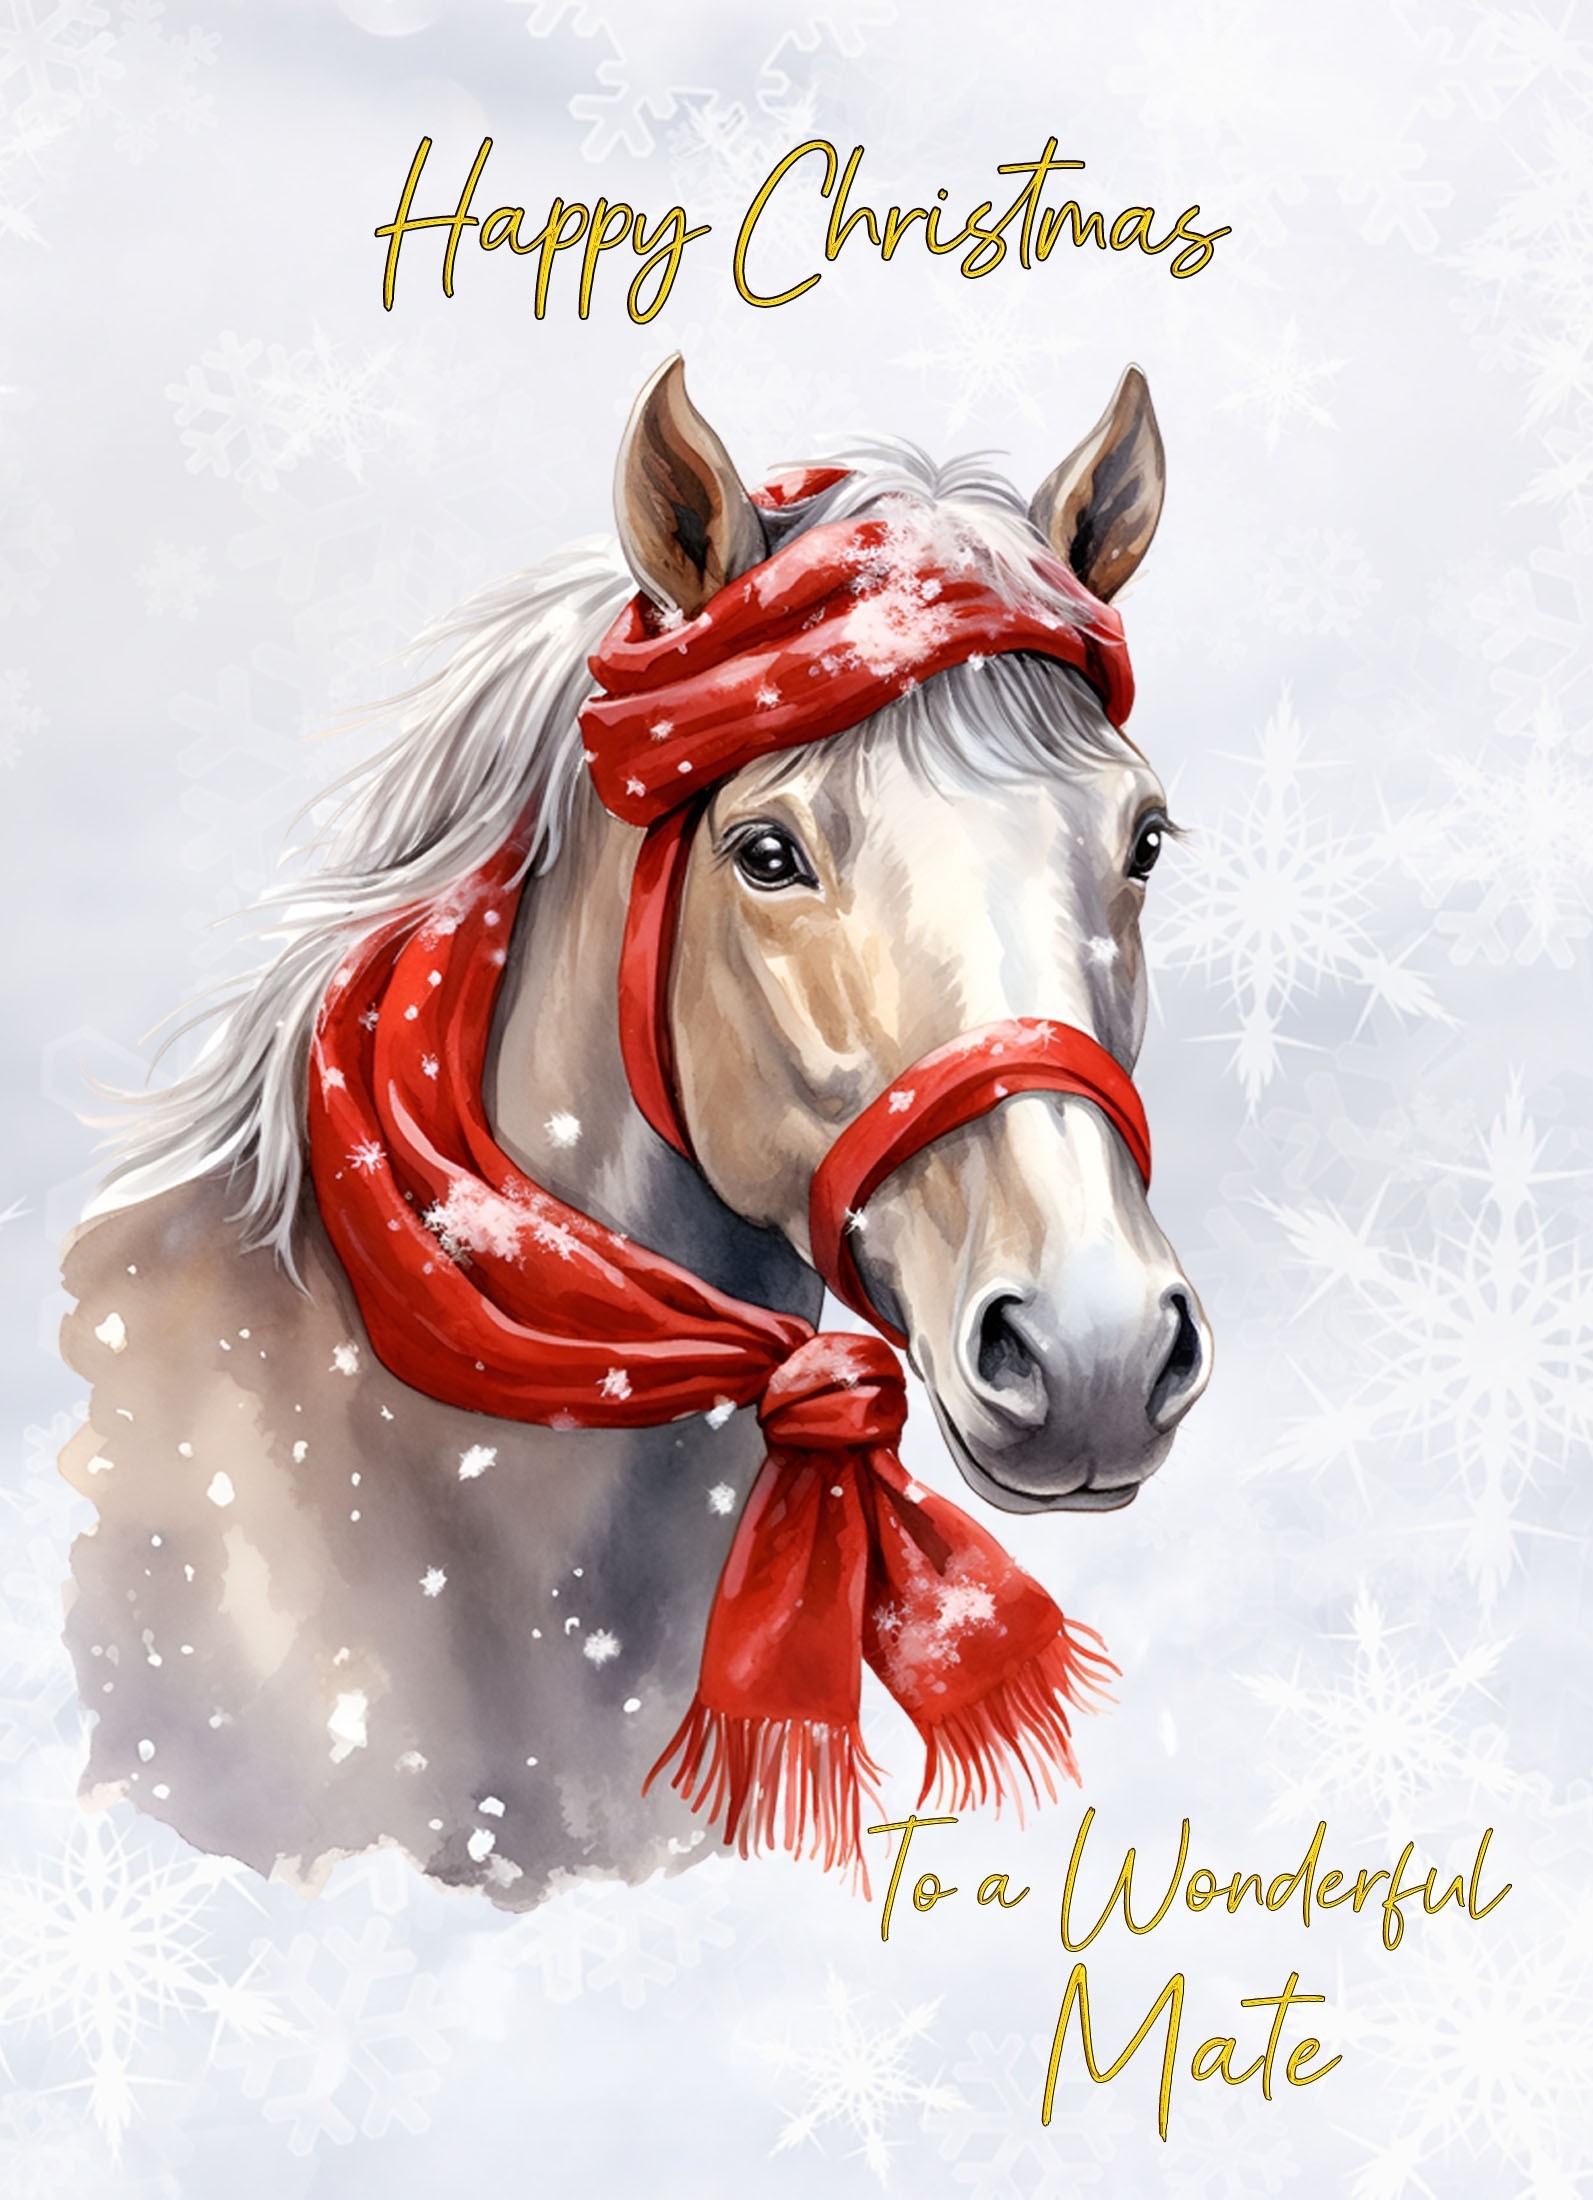 Christmas Card For Mate (Horse Art Red)